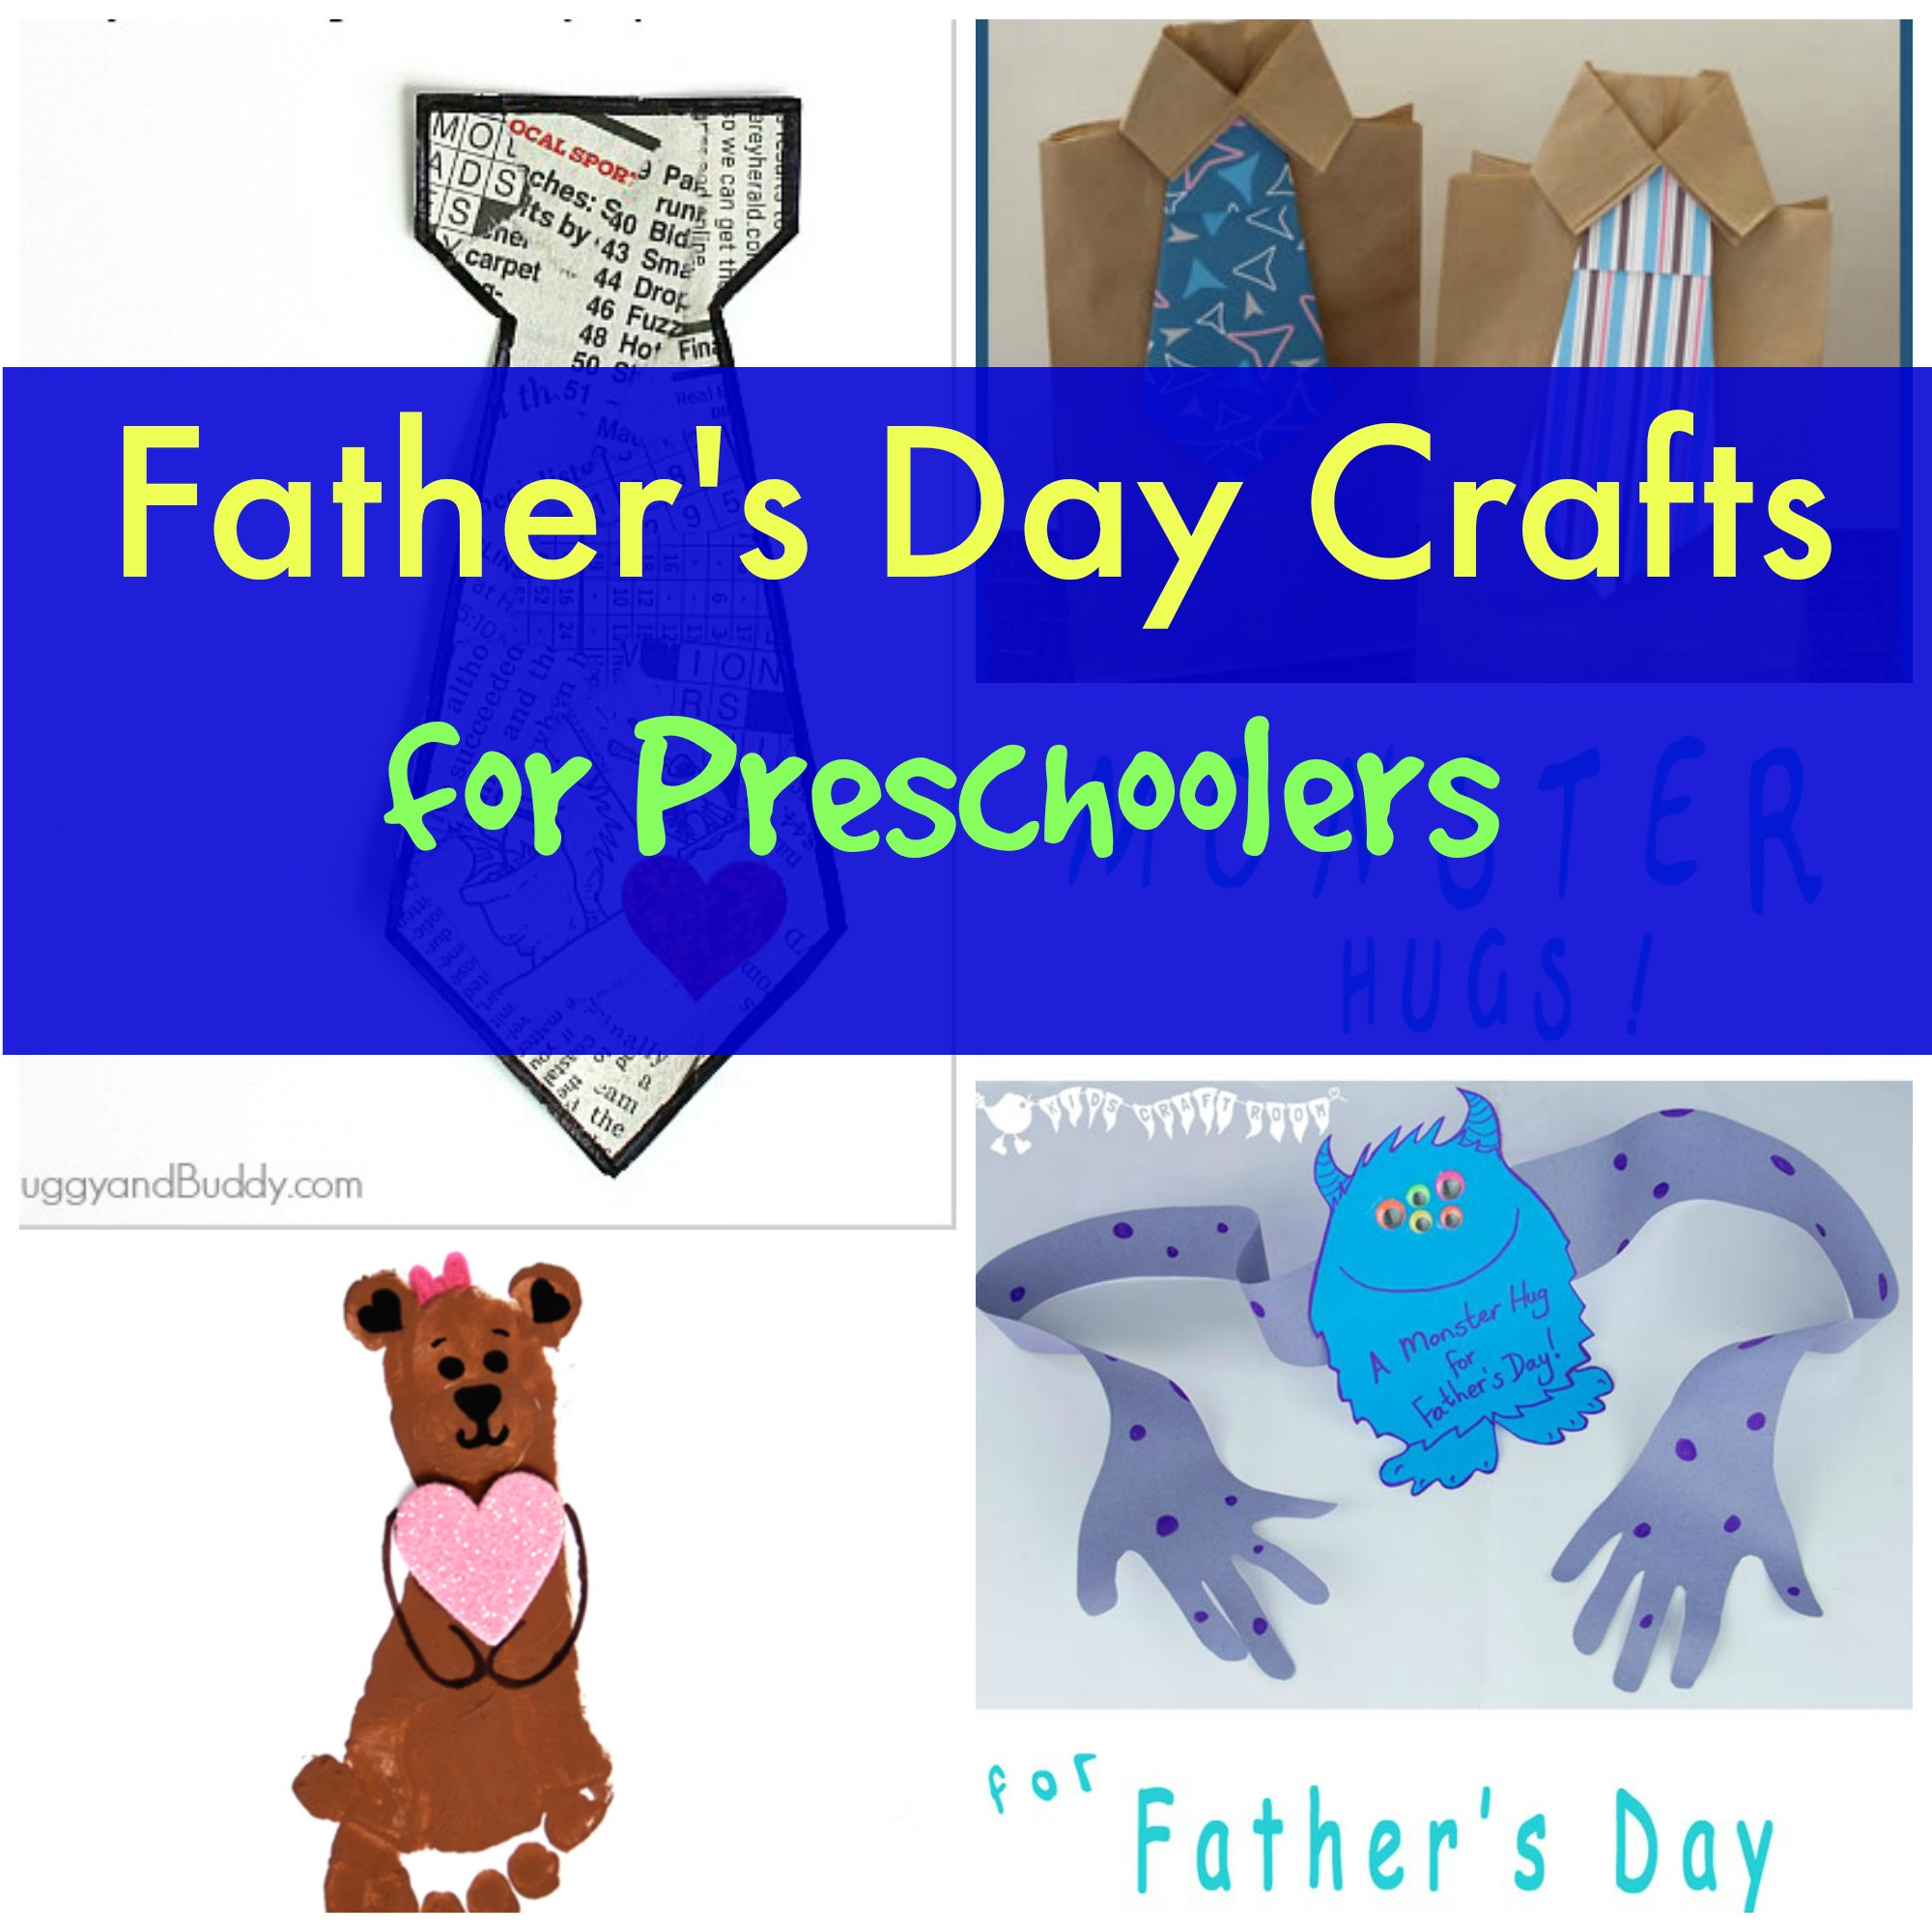 Fathers Day Crafts For Preschoolers
 Fathers Day Crafts for Preschoolers Make Dad smile